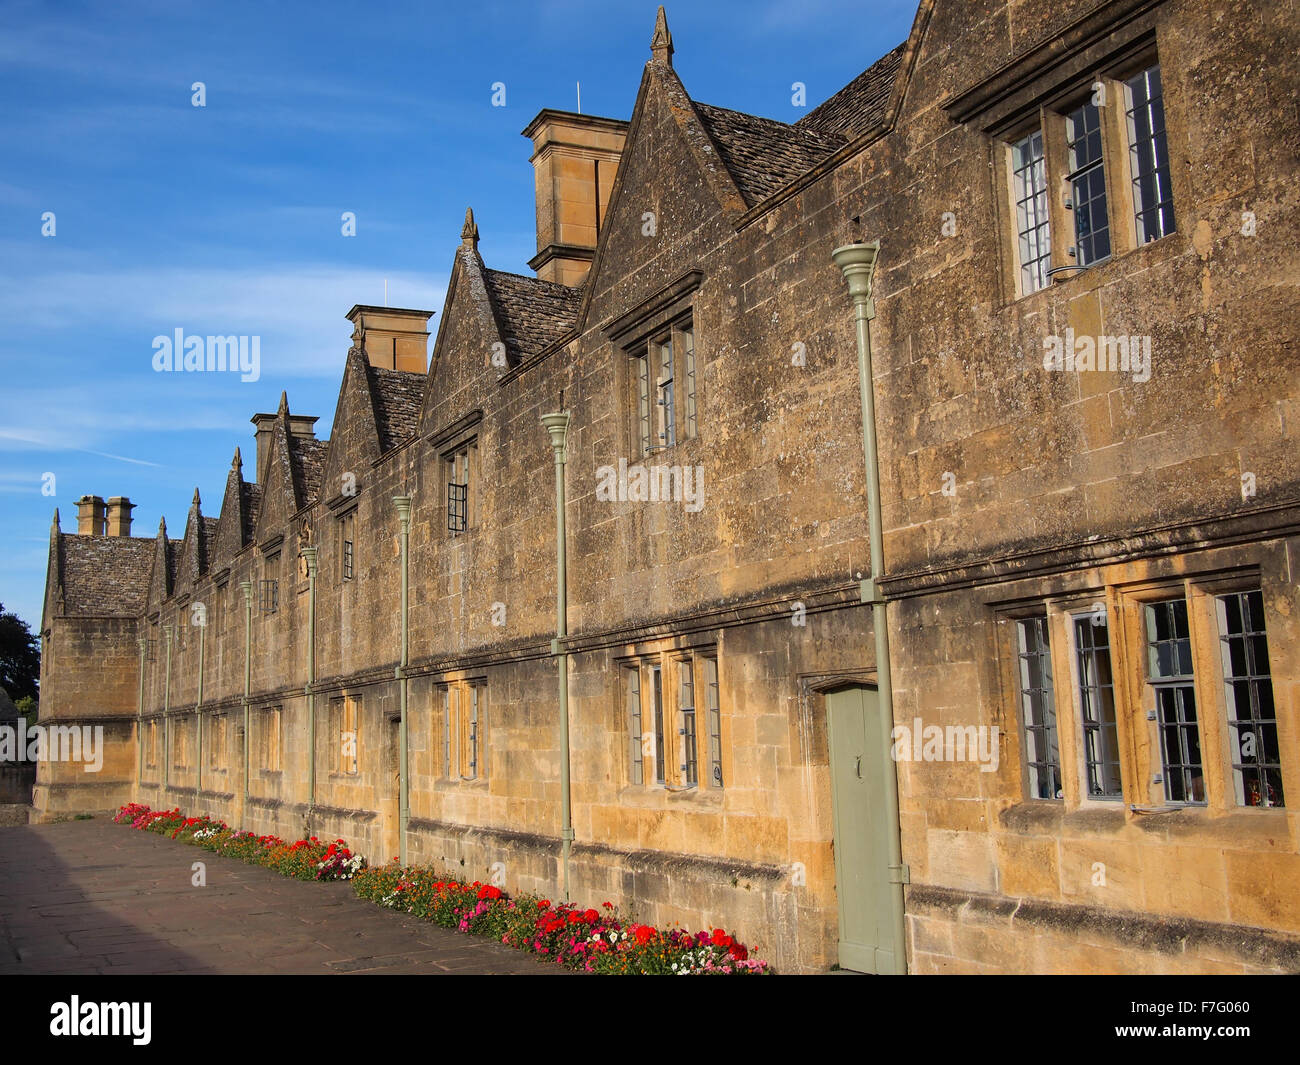 The Almshouses built out of Cotswold stone with stone tiles on the roof, called slates, built in 1612 in Chipping Campden, UK. Stock Photo